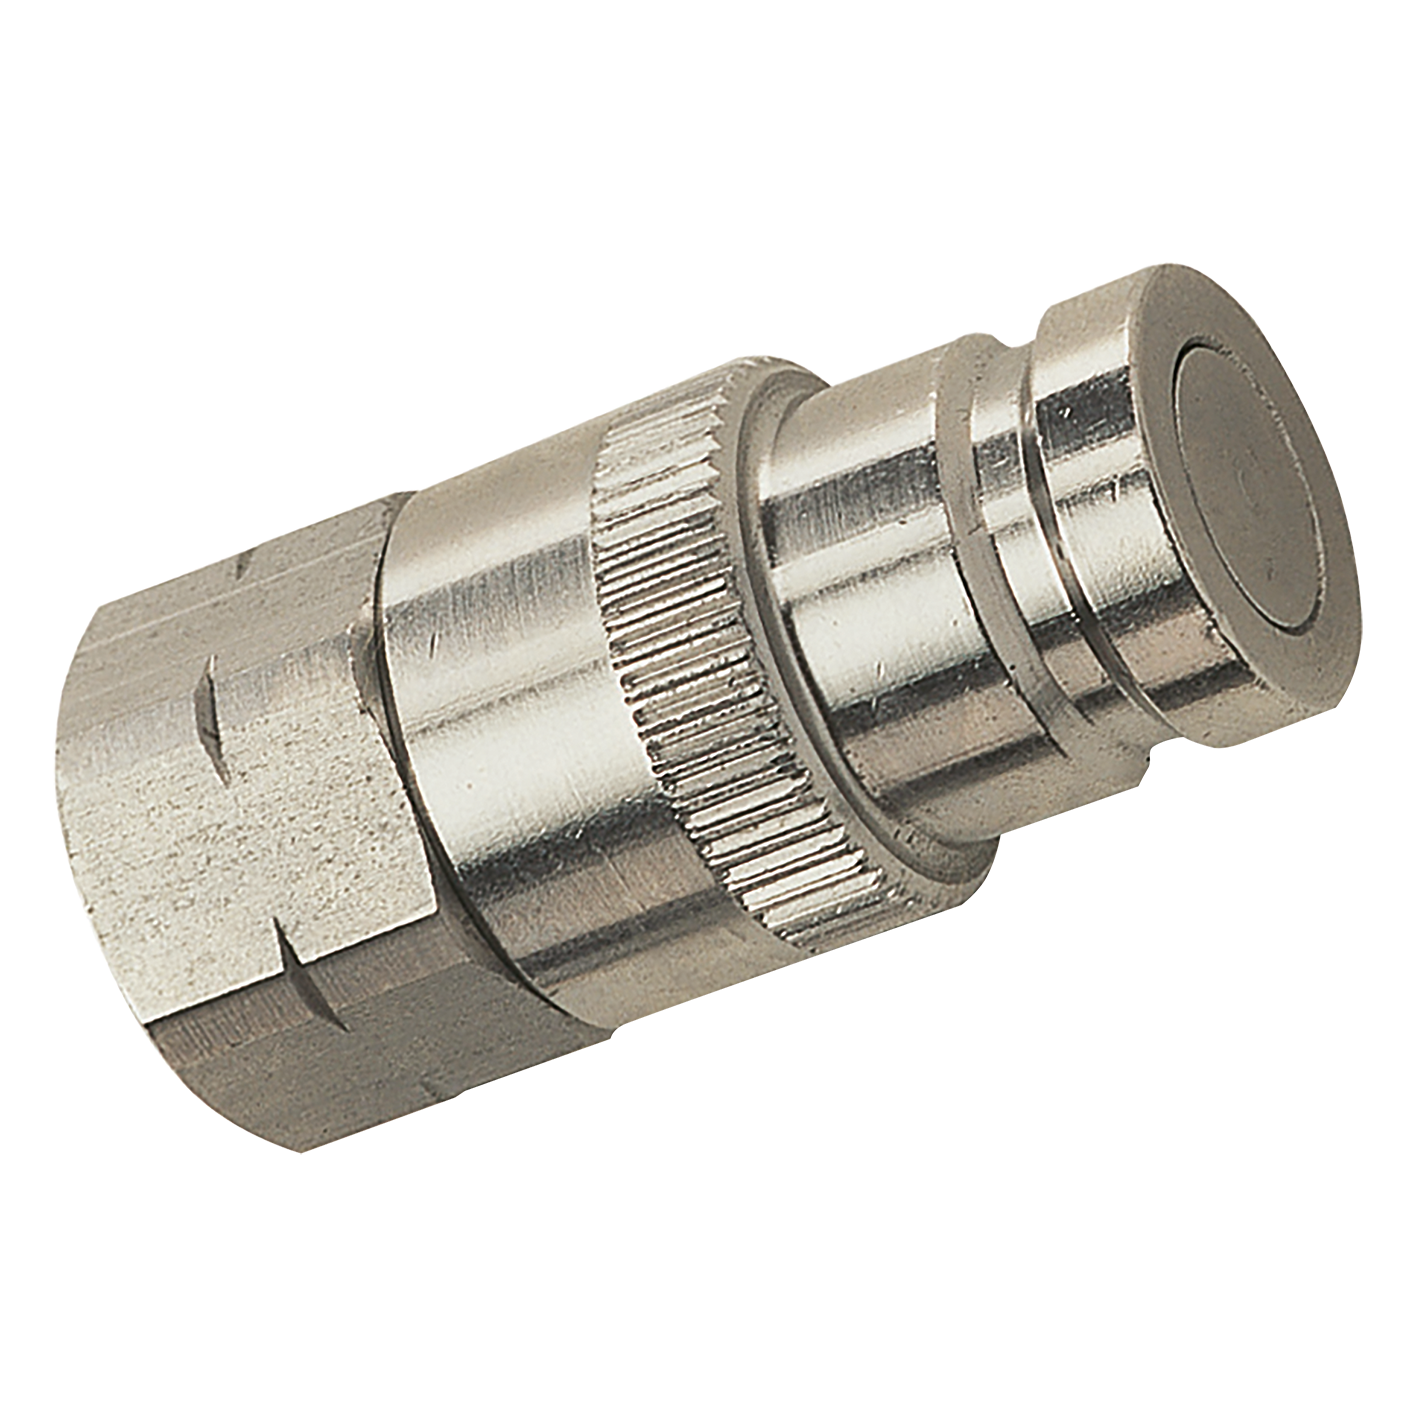 Suppliers of Quick Release Couplings UK